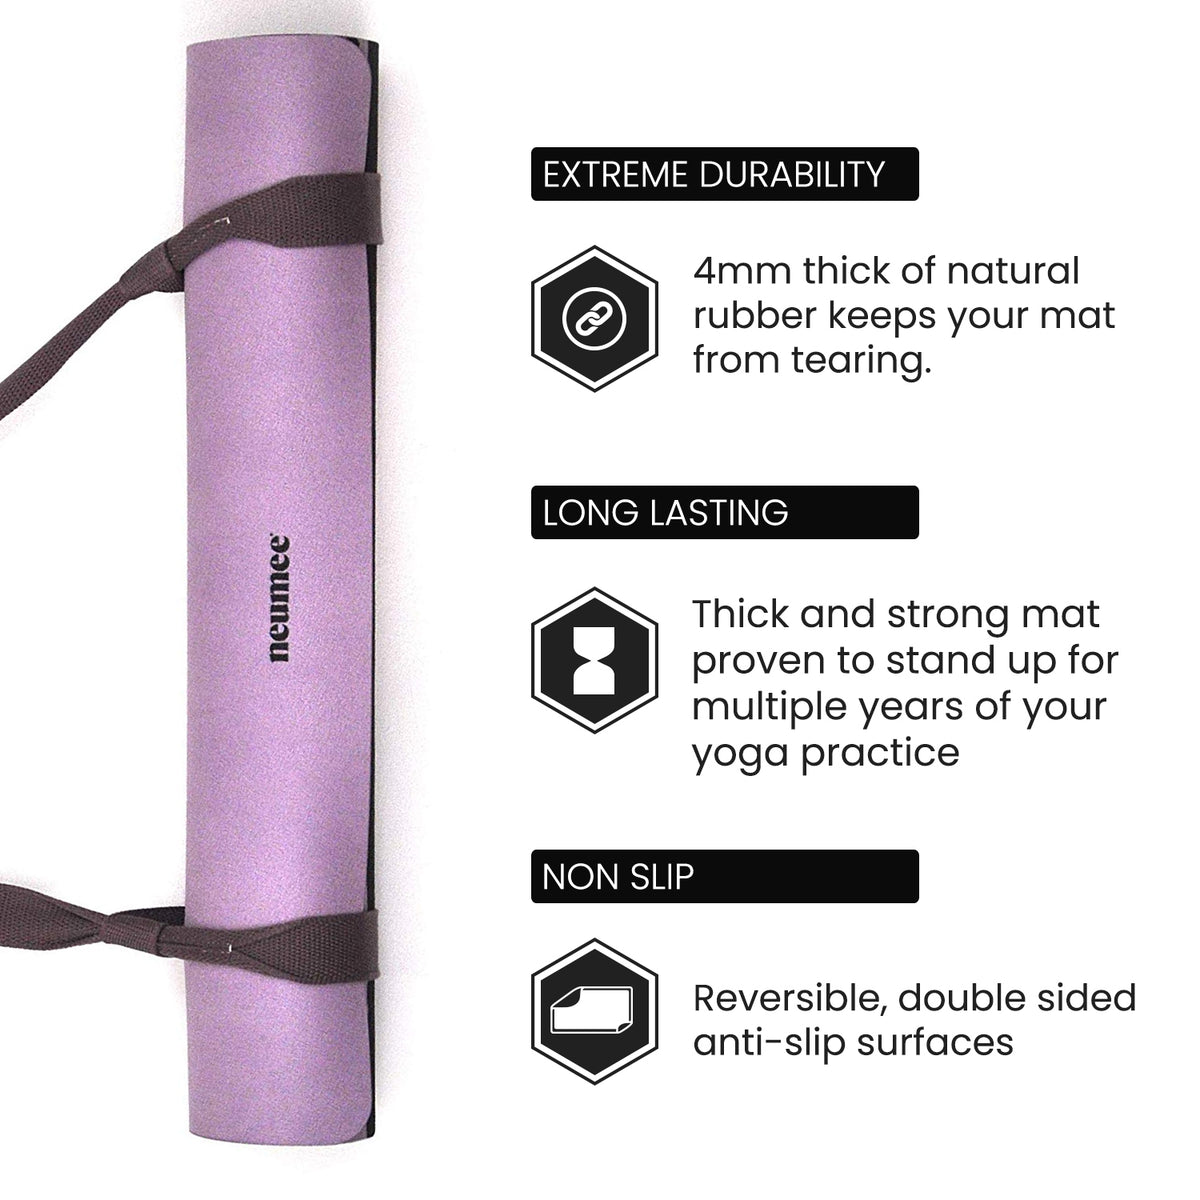  Lomi Fitness Premium Yoga Mat with Eco-Friendly Slip-Free  Material for Exercise & Fitness, Great for Yoga, Pilates and More, Home &  Gym Workouts, Lightweight, 6mm 61cm by 173cm (24in x